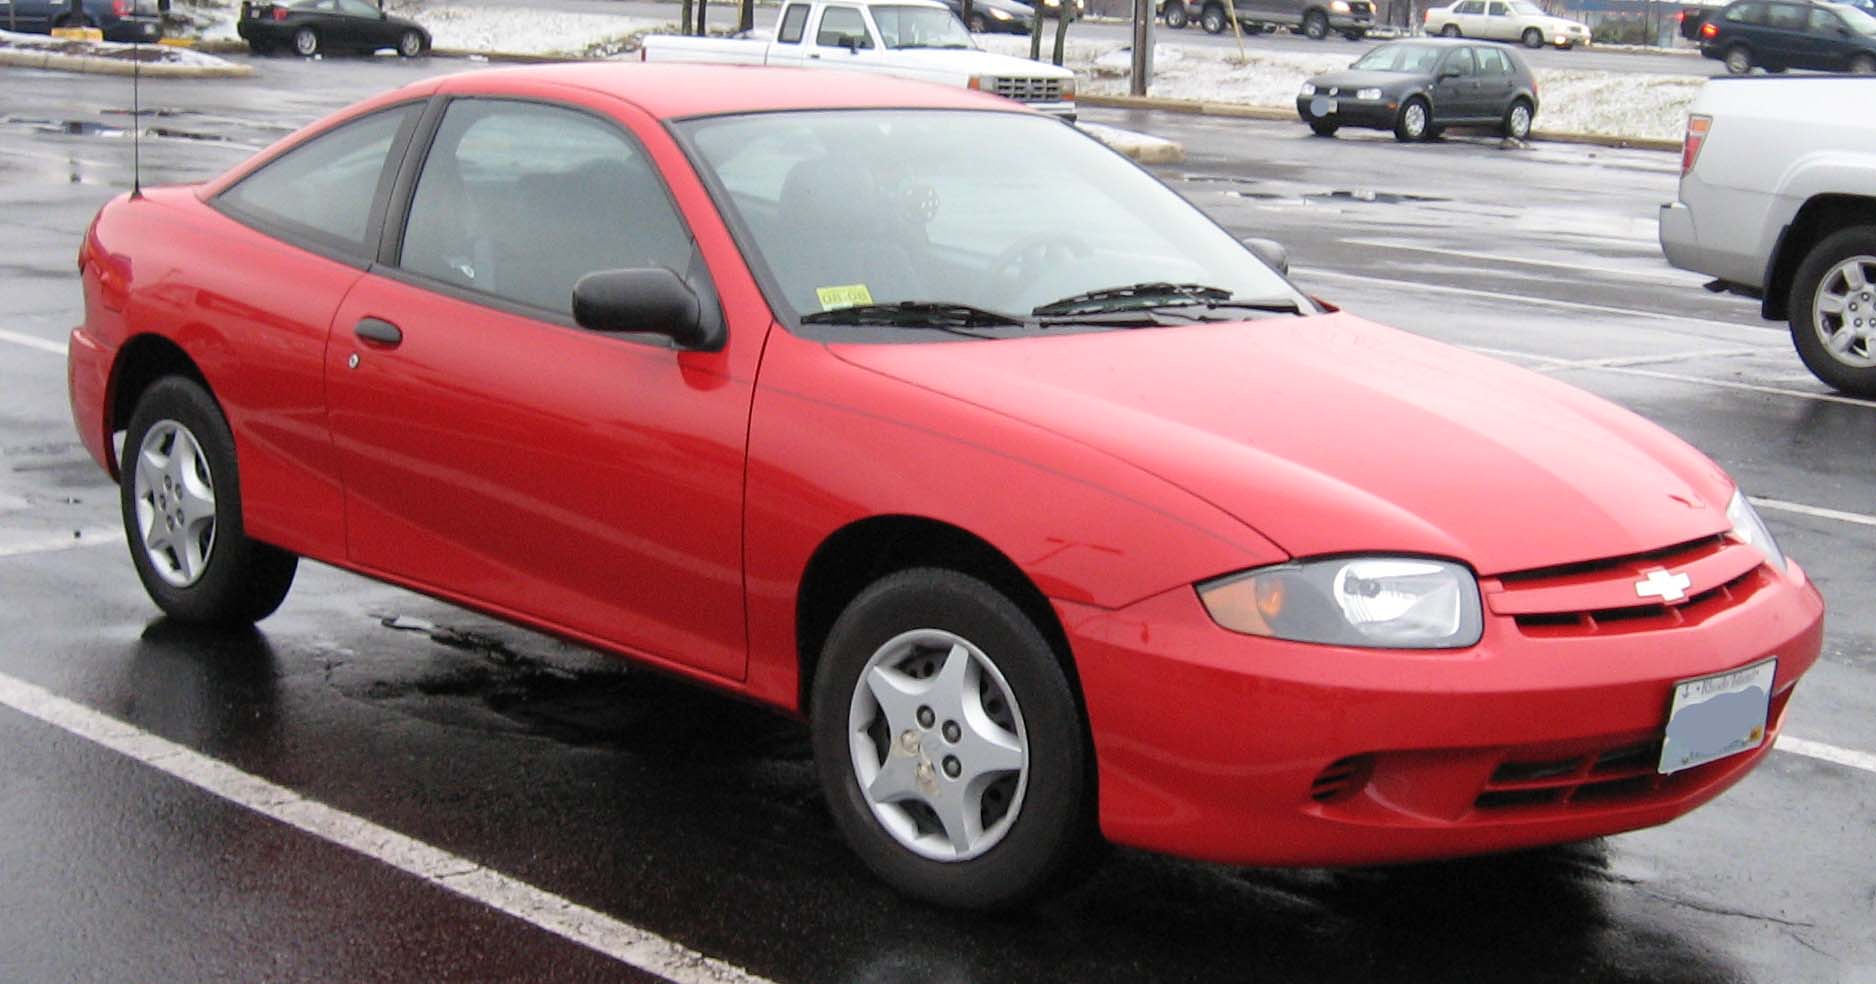 File:03-05 Chevrolet Cavalier coupe.jpg - Wikimedia Commons